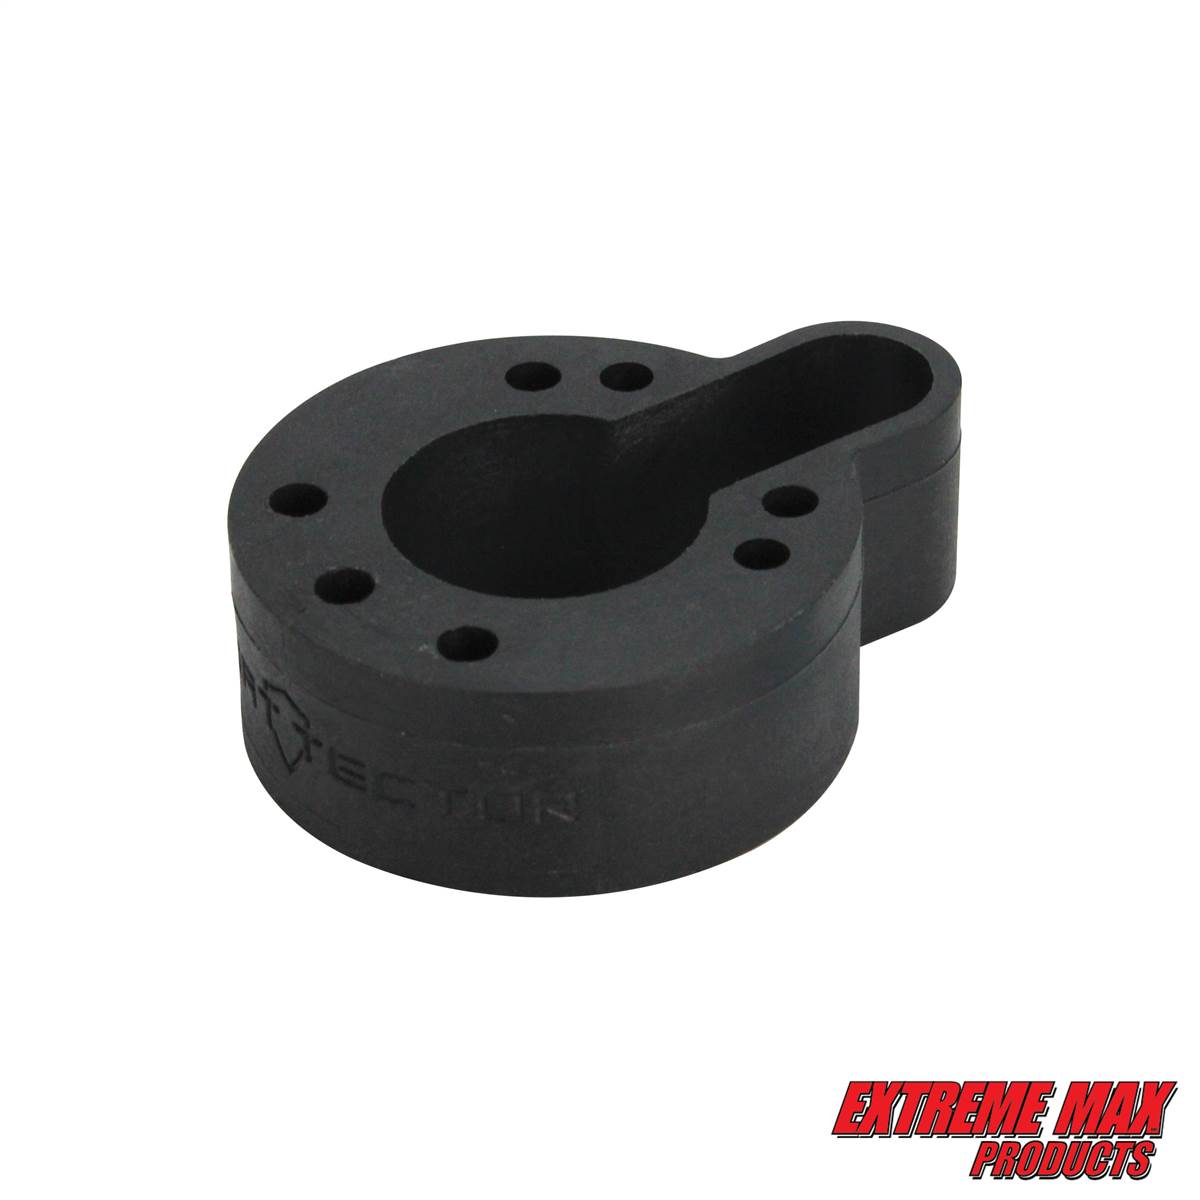 Extreme Max 3002.4561 Clean Rig Spacer - Small, 2.5 Diameter